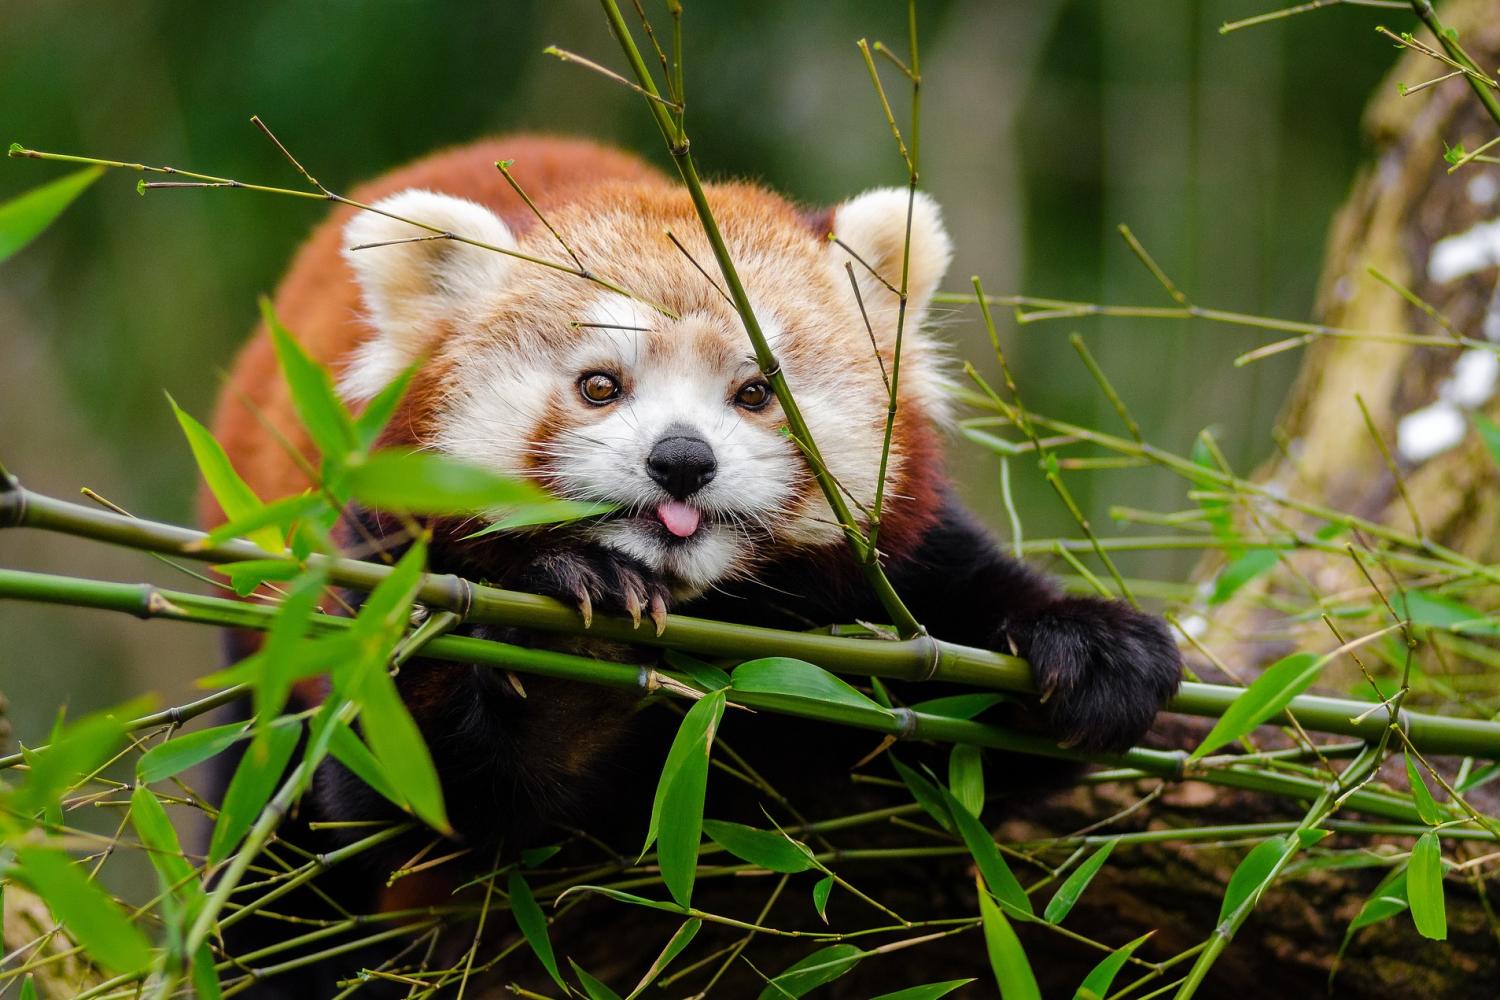 endangered red panda in bamboo forest - biodiversity - biodiversity disclosures